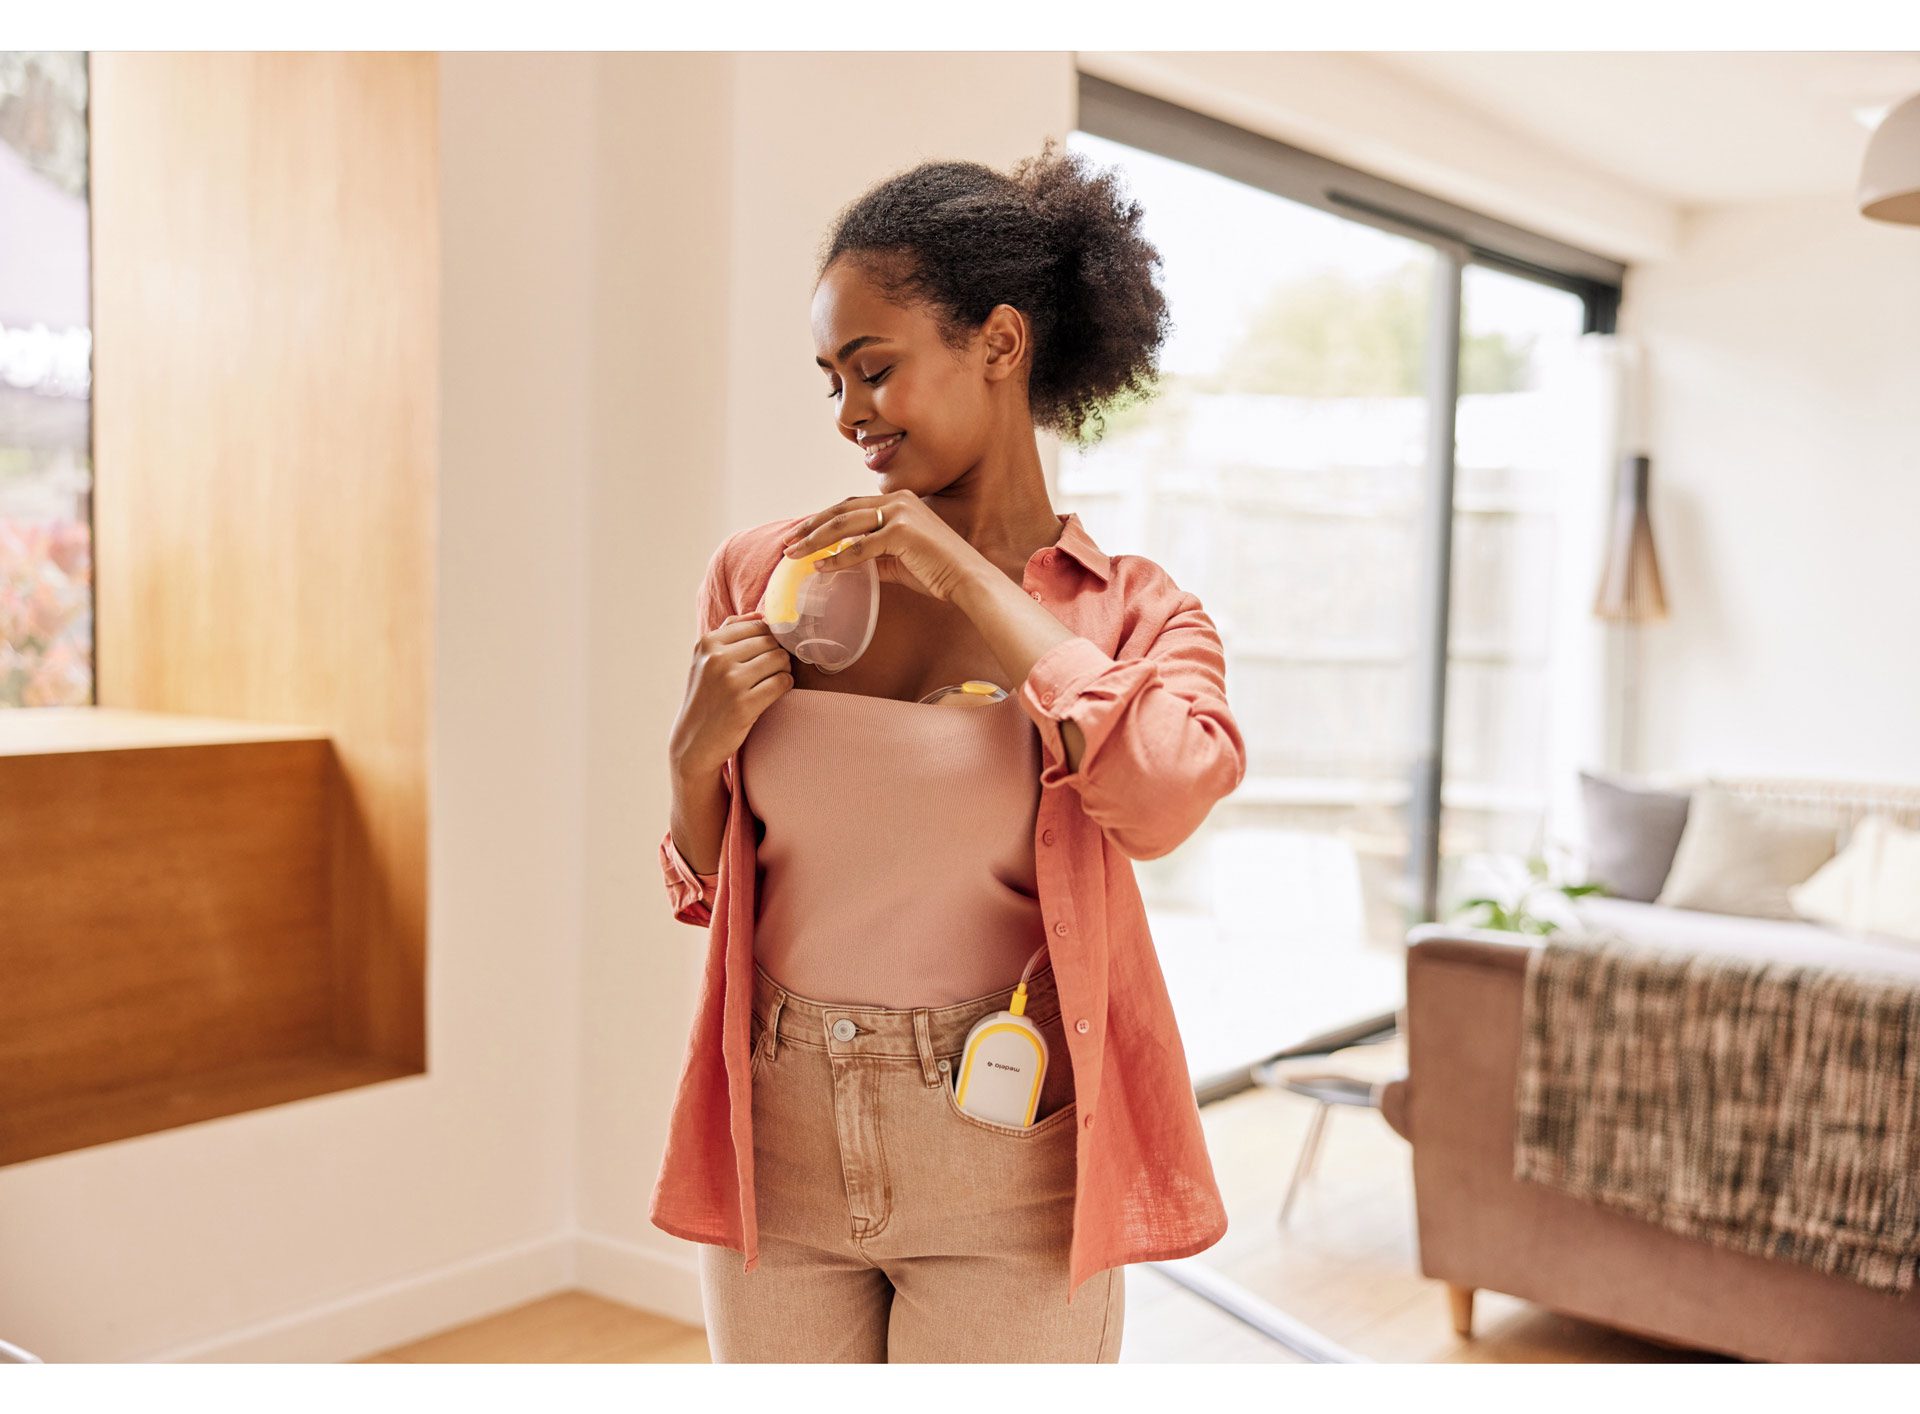 Medela Hands-free Collection Cups, Compatible with Freestyle Flex